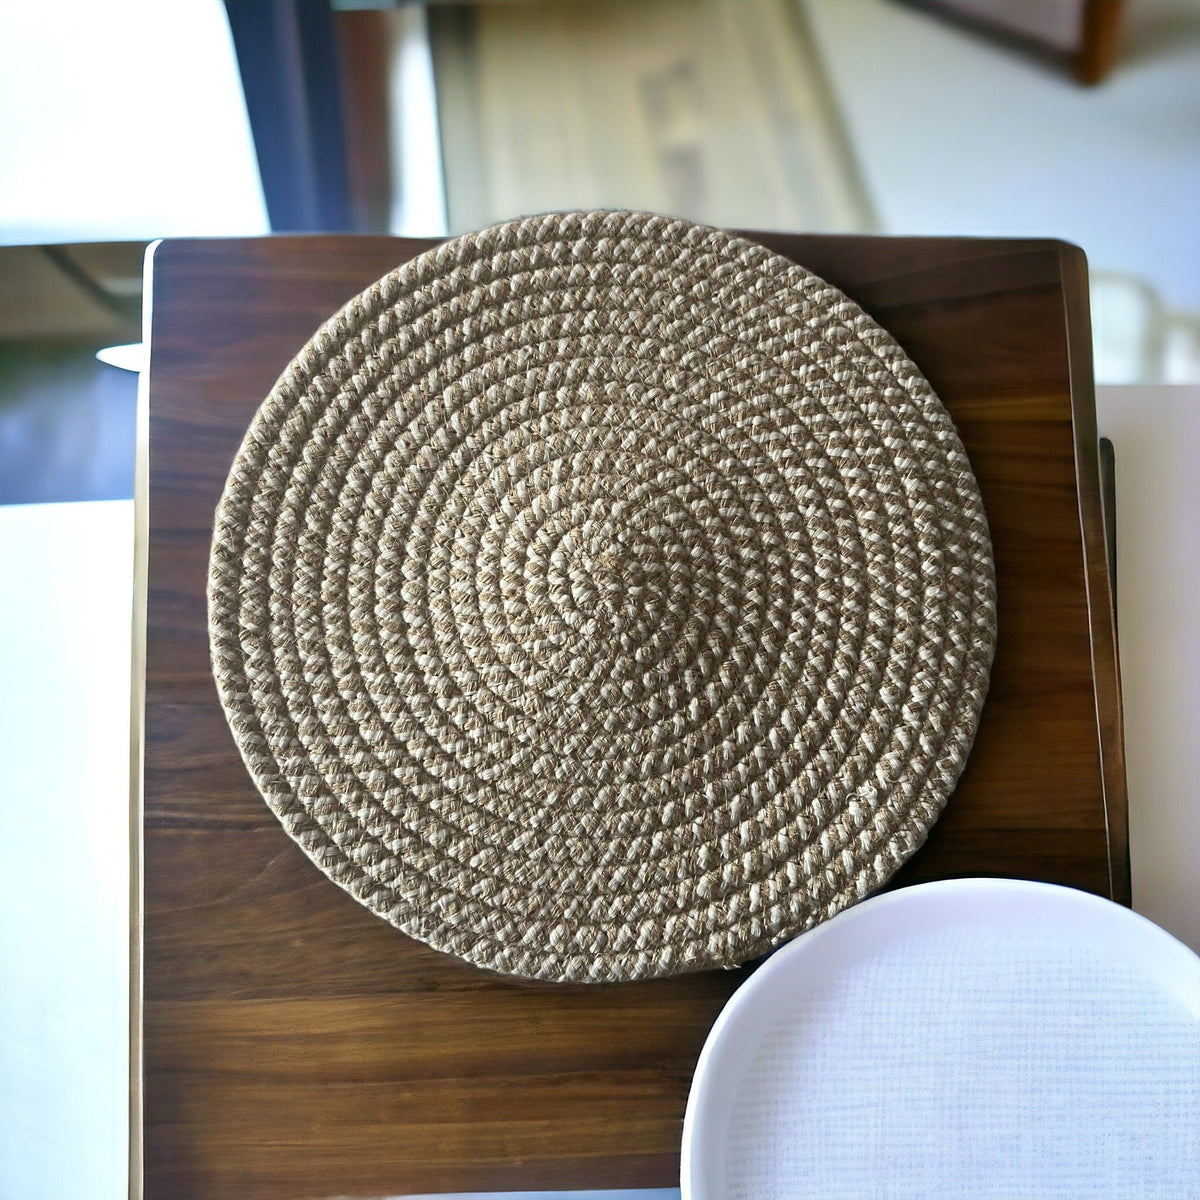 Woven Natural & White Placemats and Drinks Coaster Set - Cherish Home